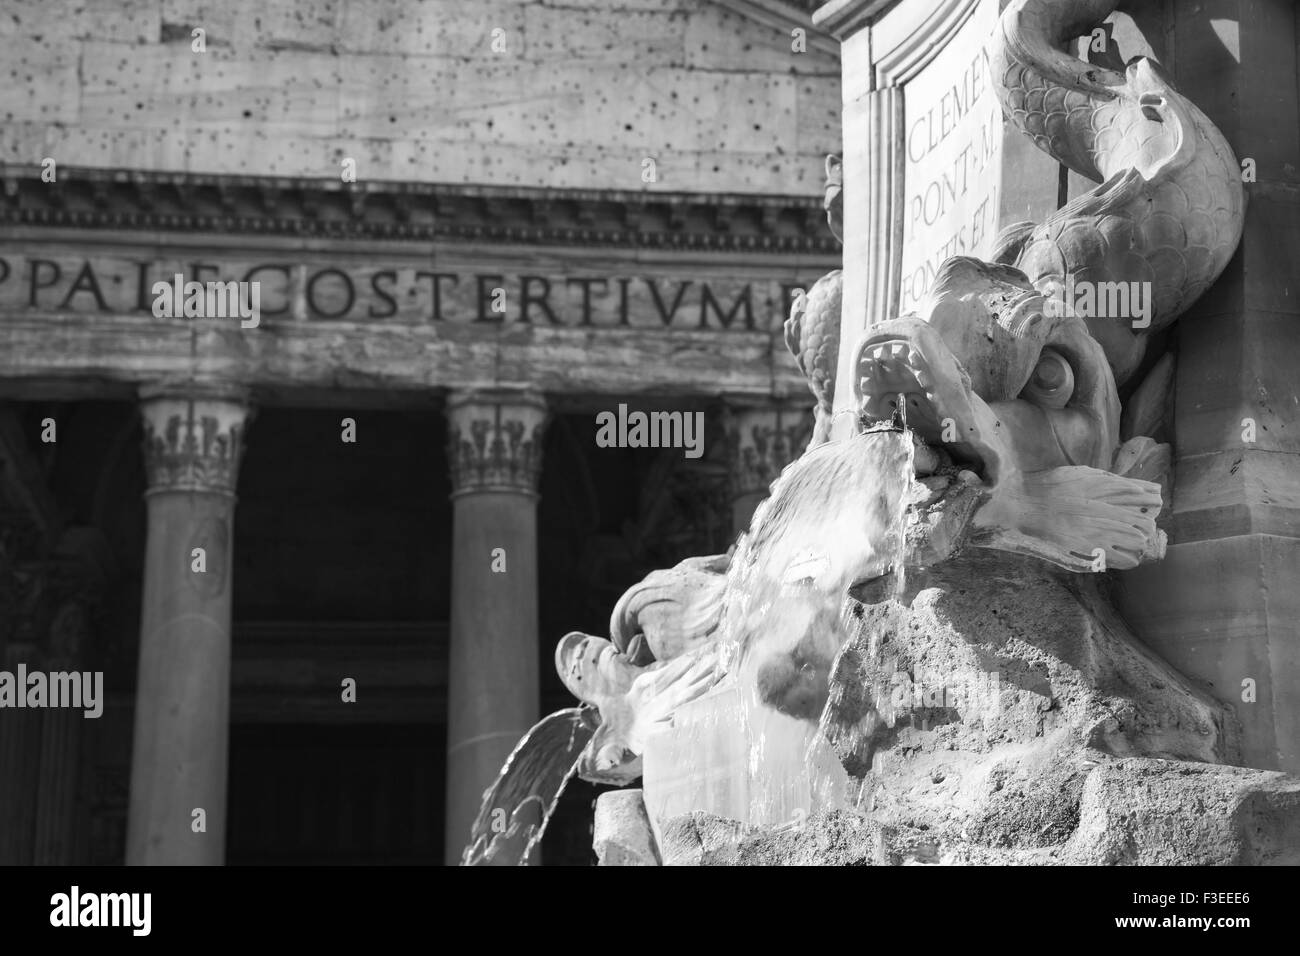 Fragment of fountain with dolphins sculptures. Italy, Roma. Piazza della Rotonda. Fontana del Pantheon Stock Photo